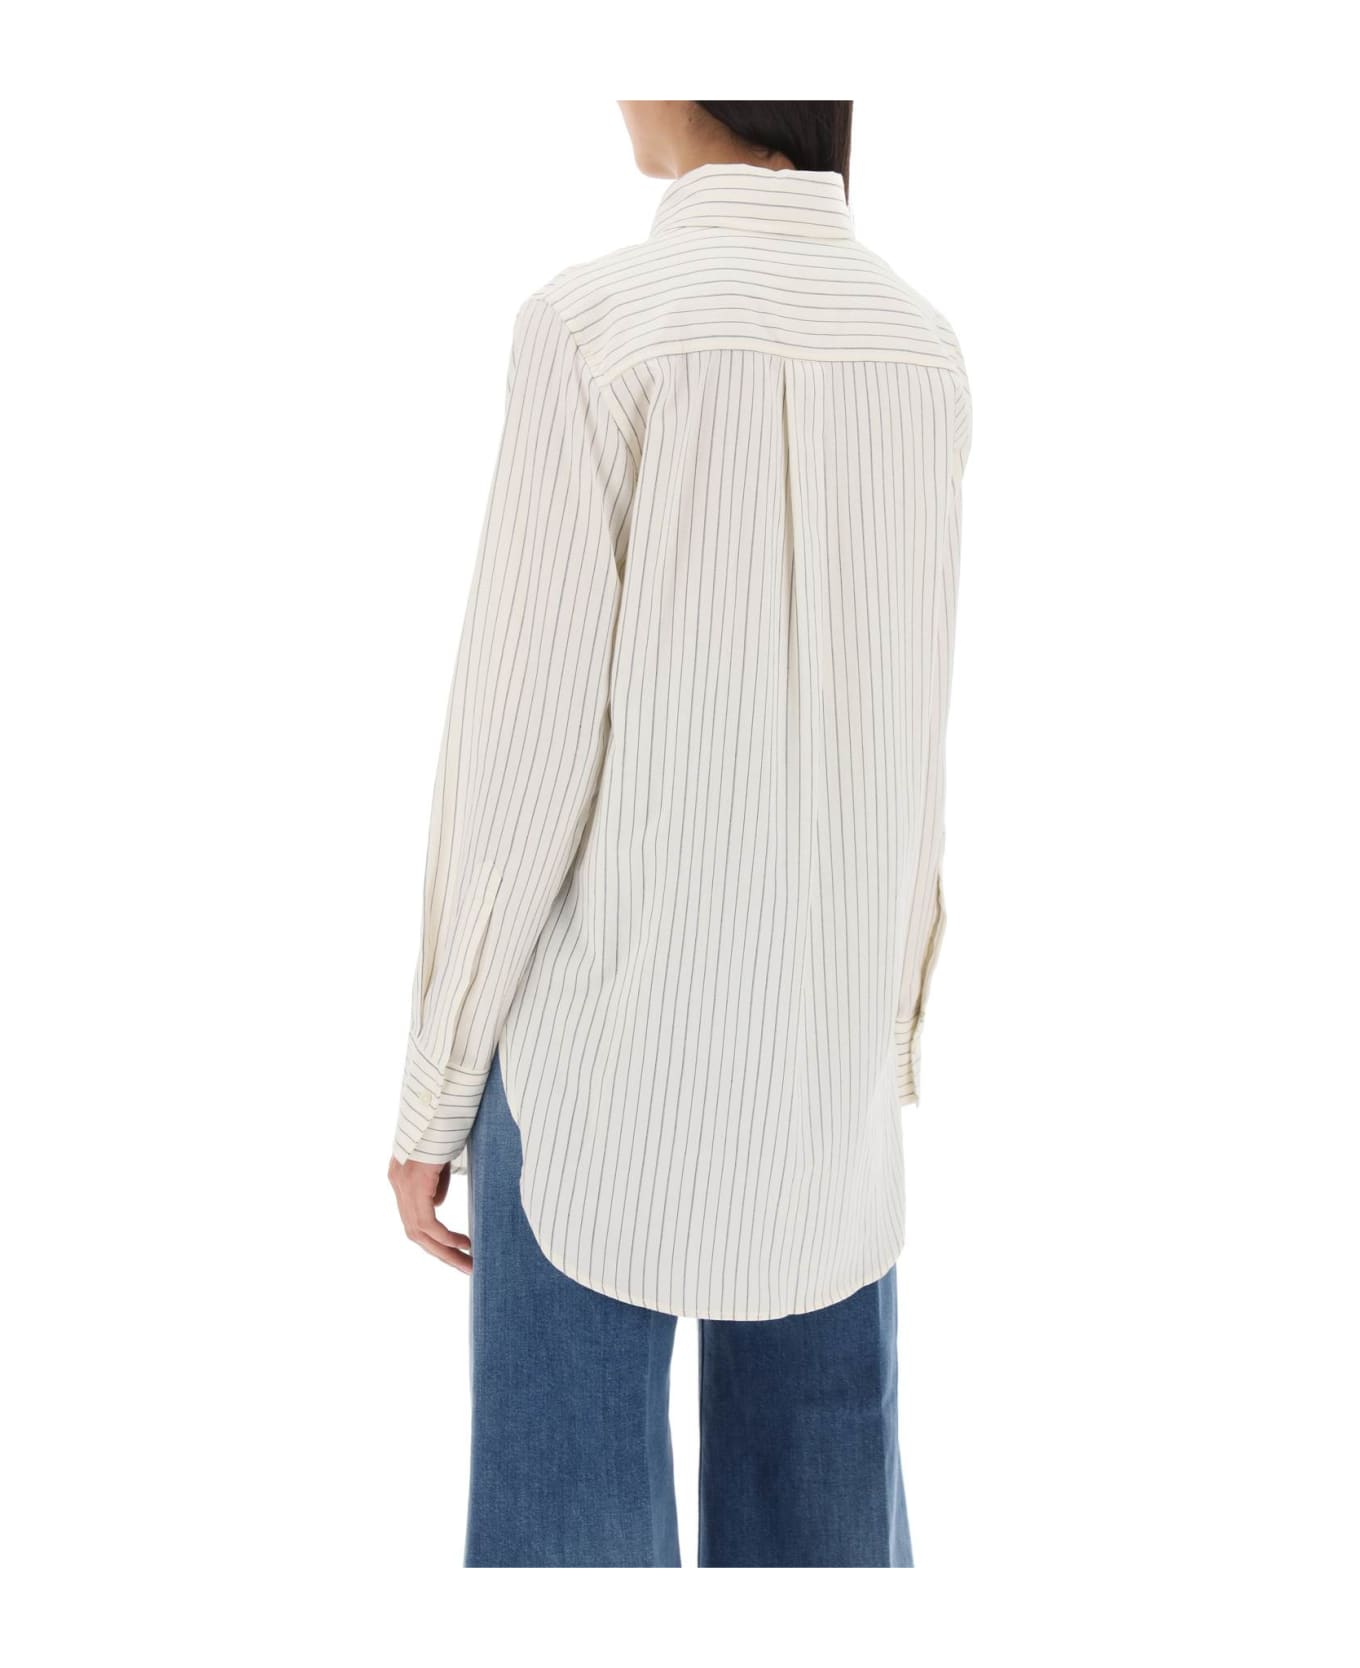 Closed Striped Cotton-wool Shirt - IVORY シャツ